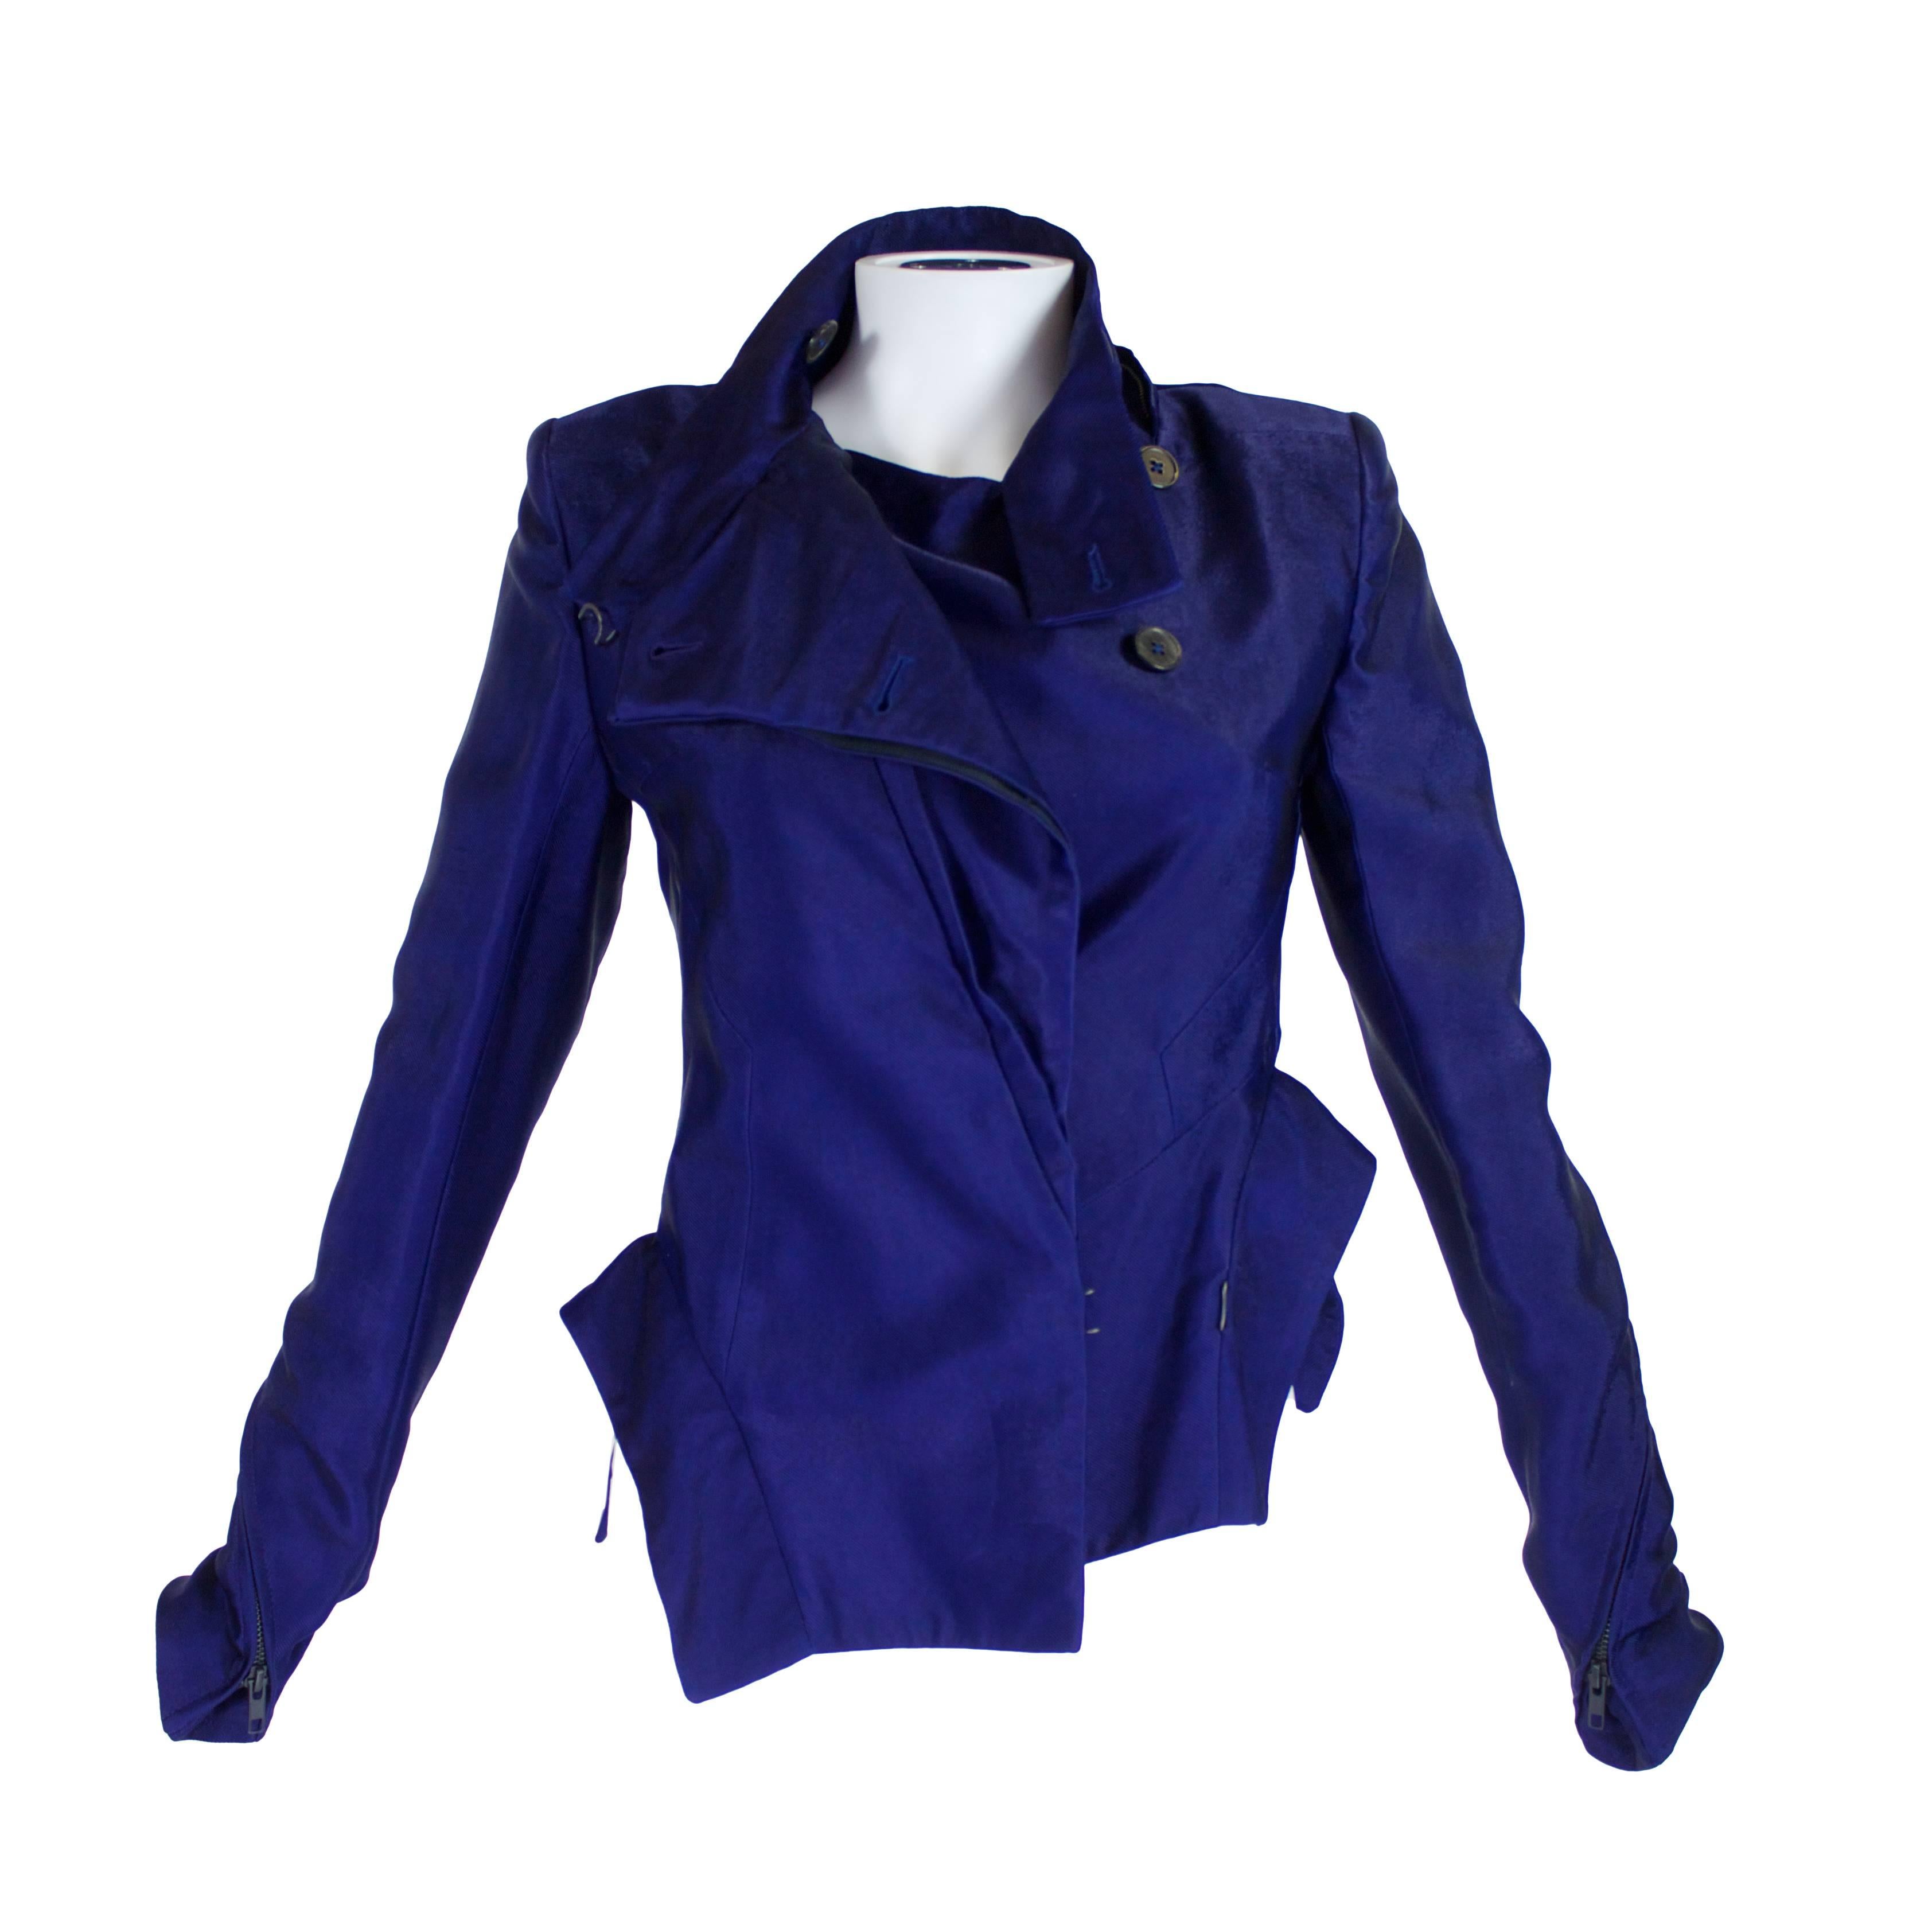 Ann Demeulemeester Asymmetrical Navy Moto Jacket with Zip Collar For Sale